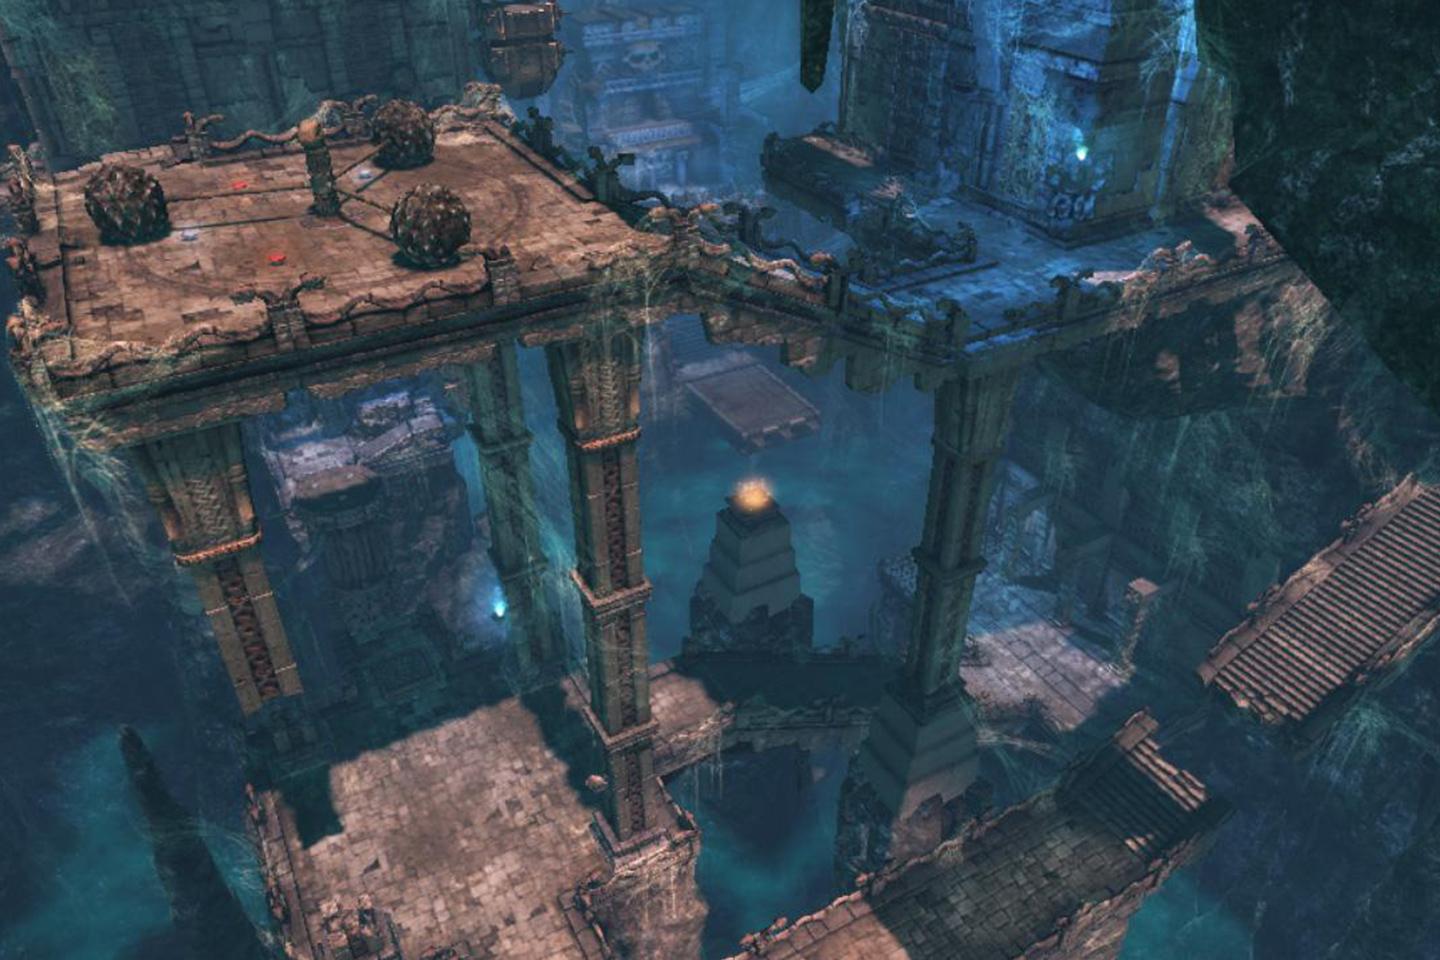 An expansive view of a crumbling aqueduct in a subterranean cavern from a Tomb Raider game, hinting at the scale and puzzles of the ancient ruins.